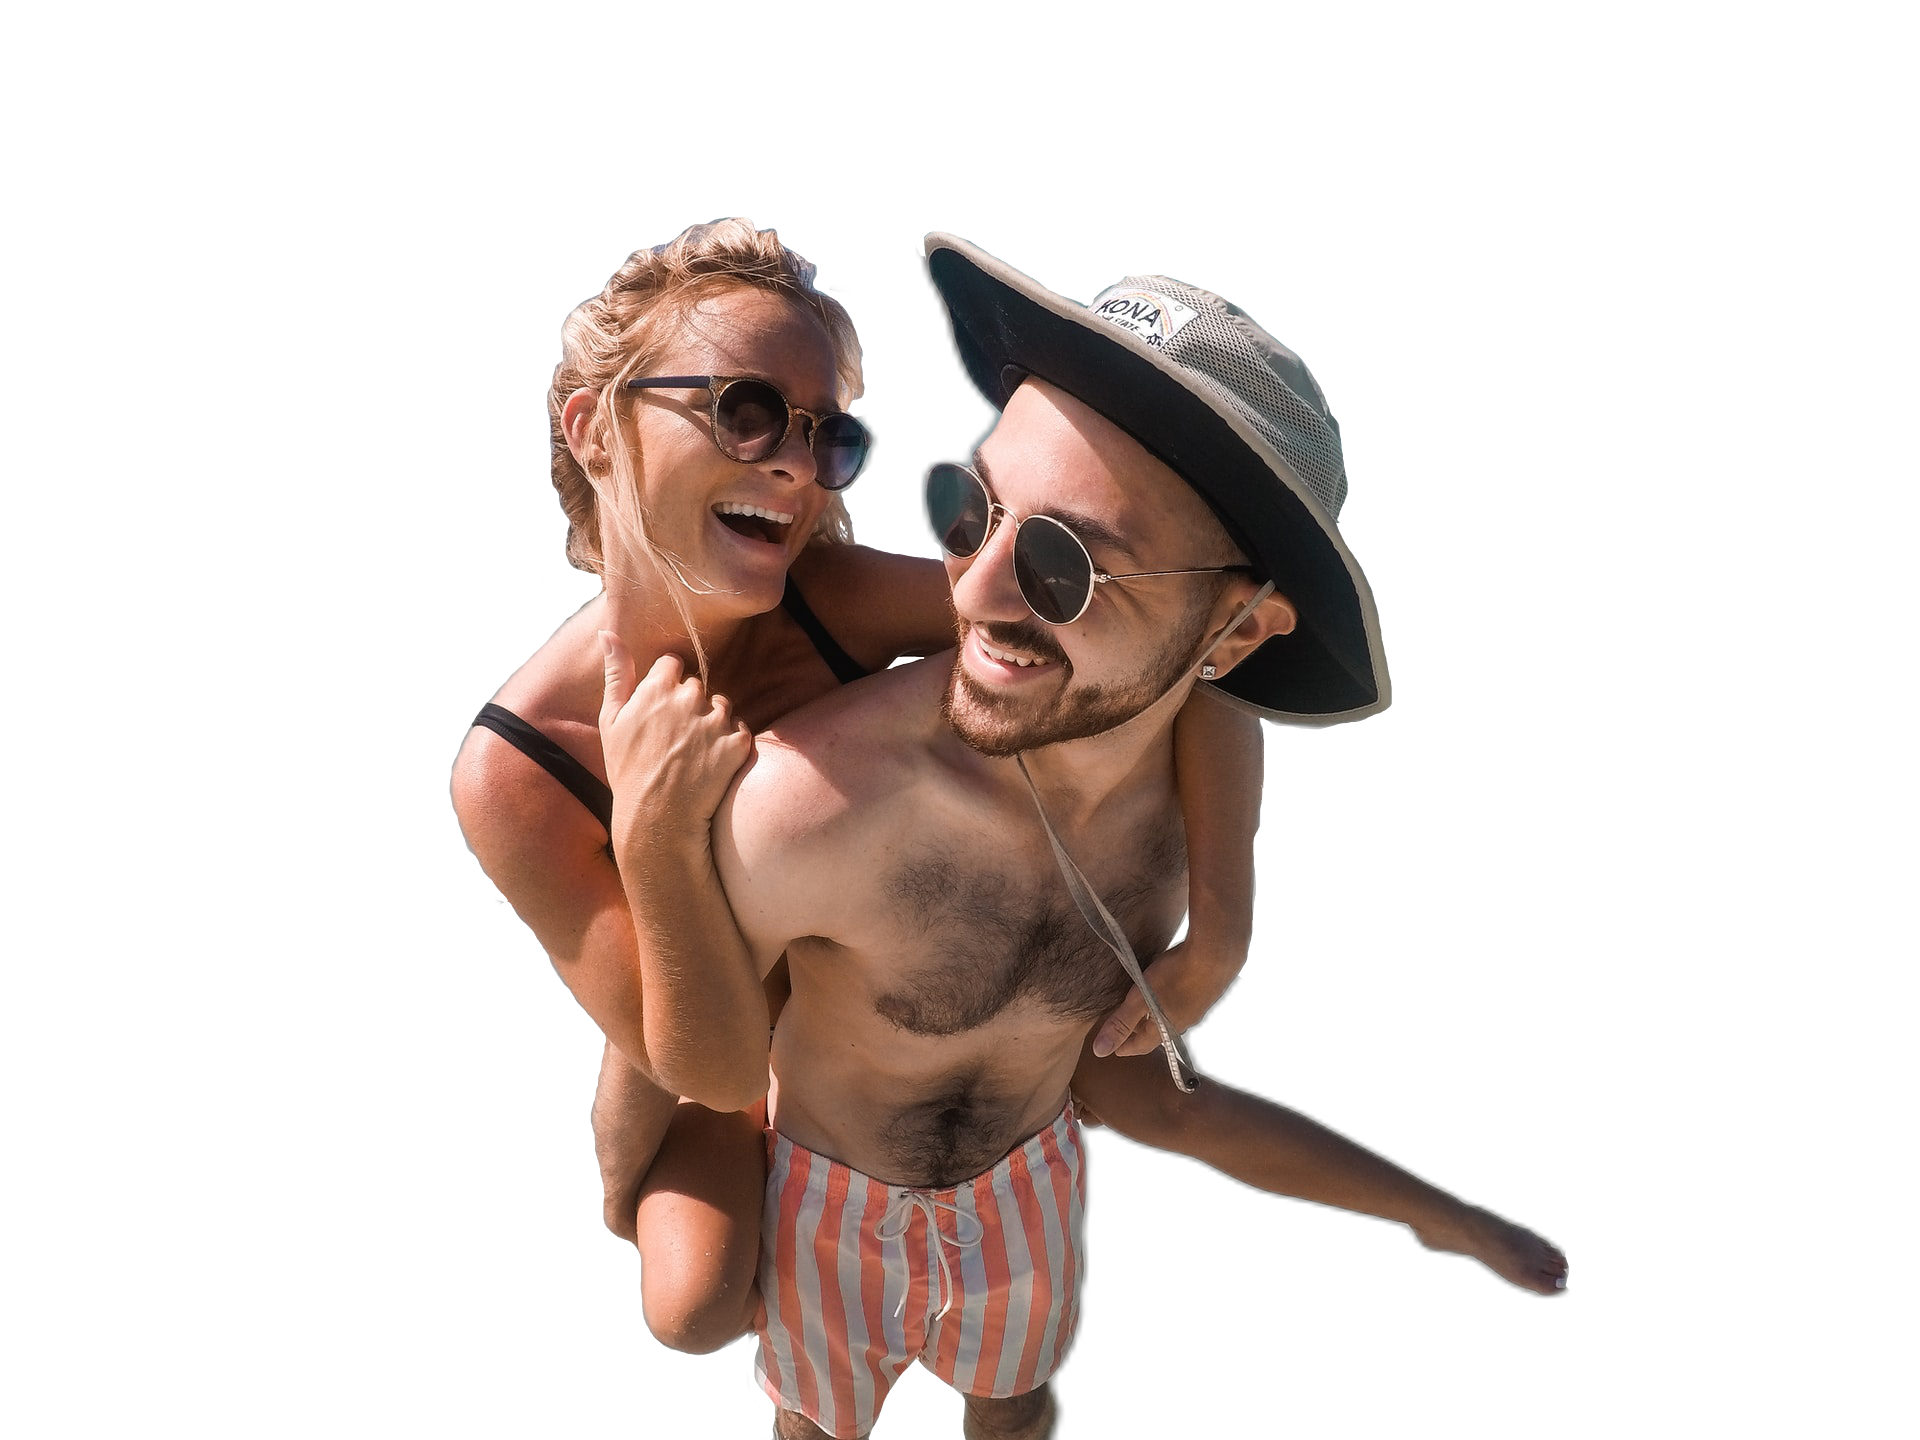 An image of a couple on a beach's background removed using no-bg